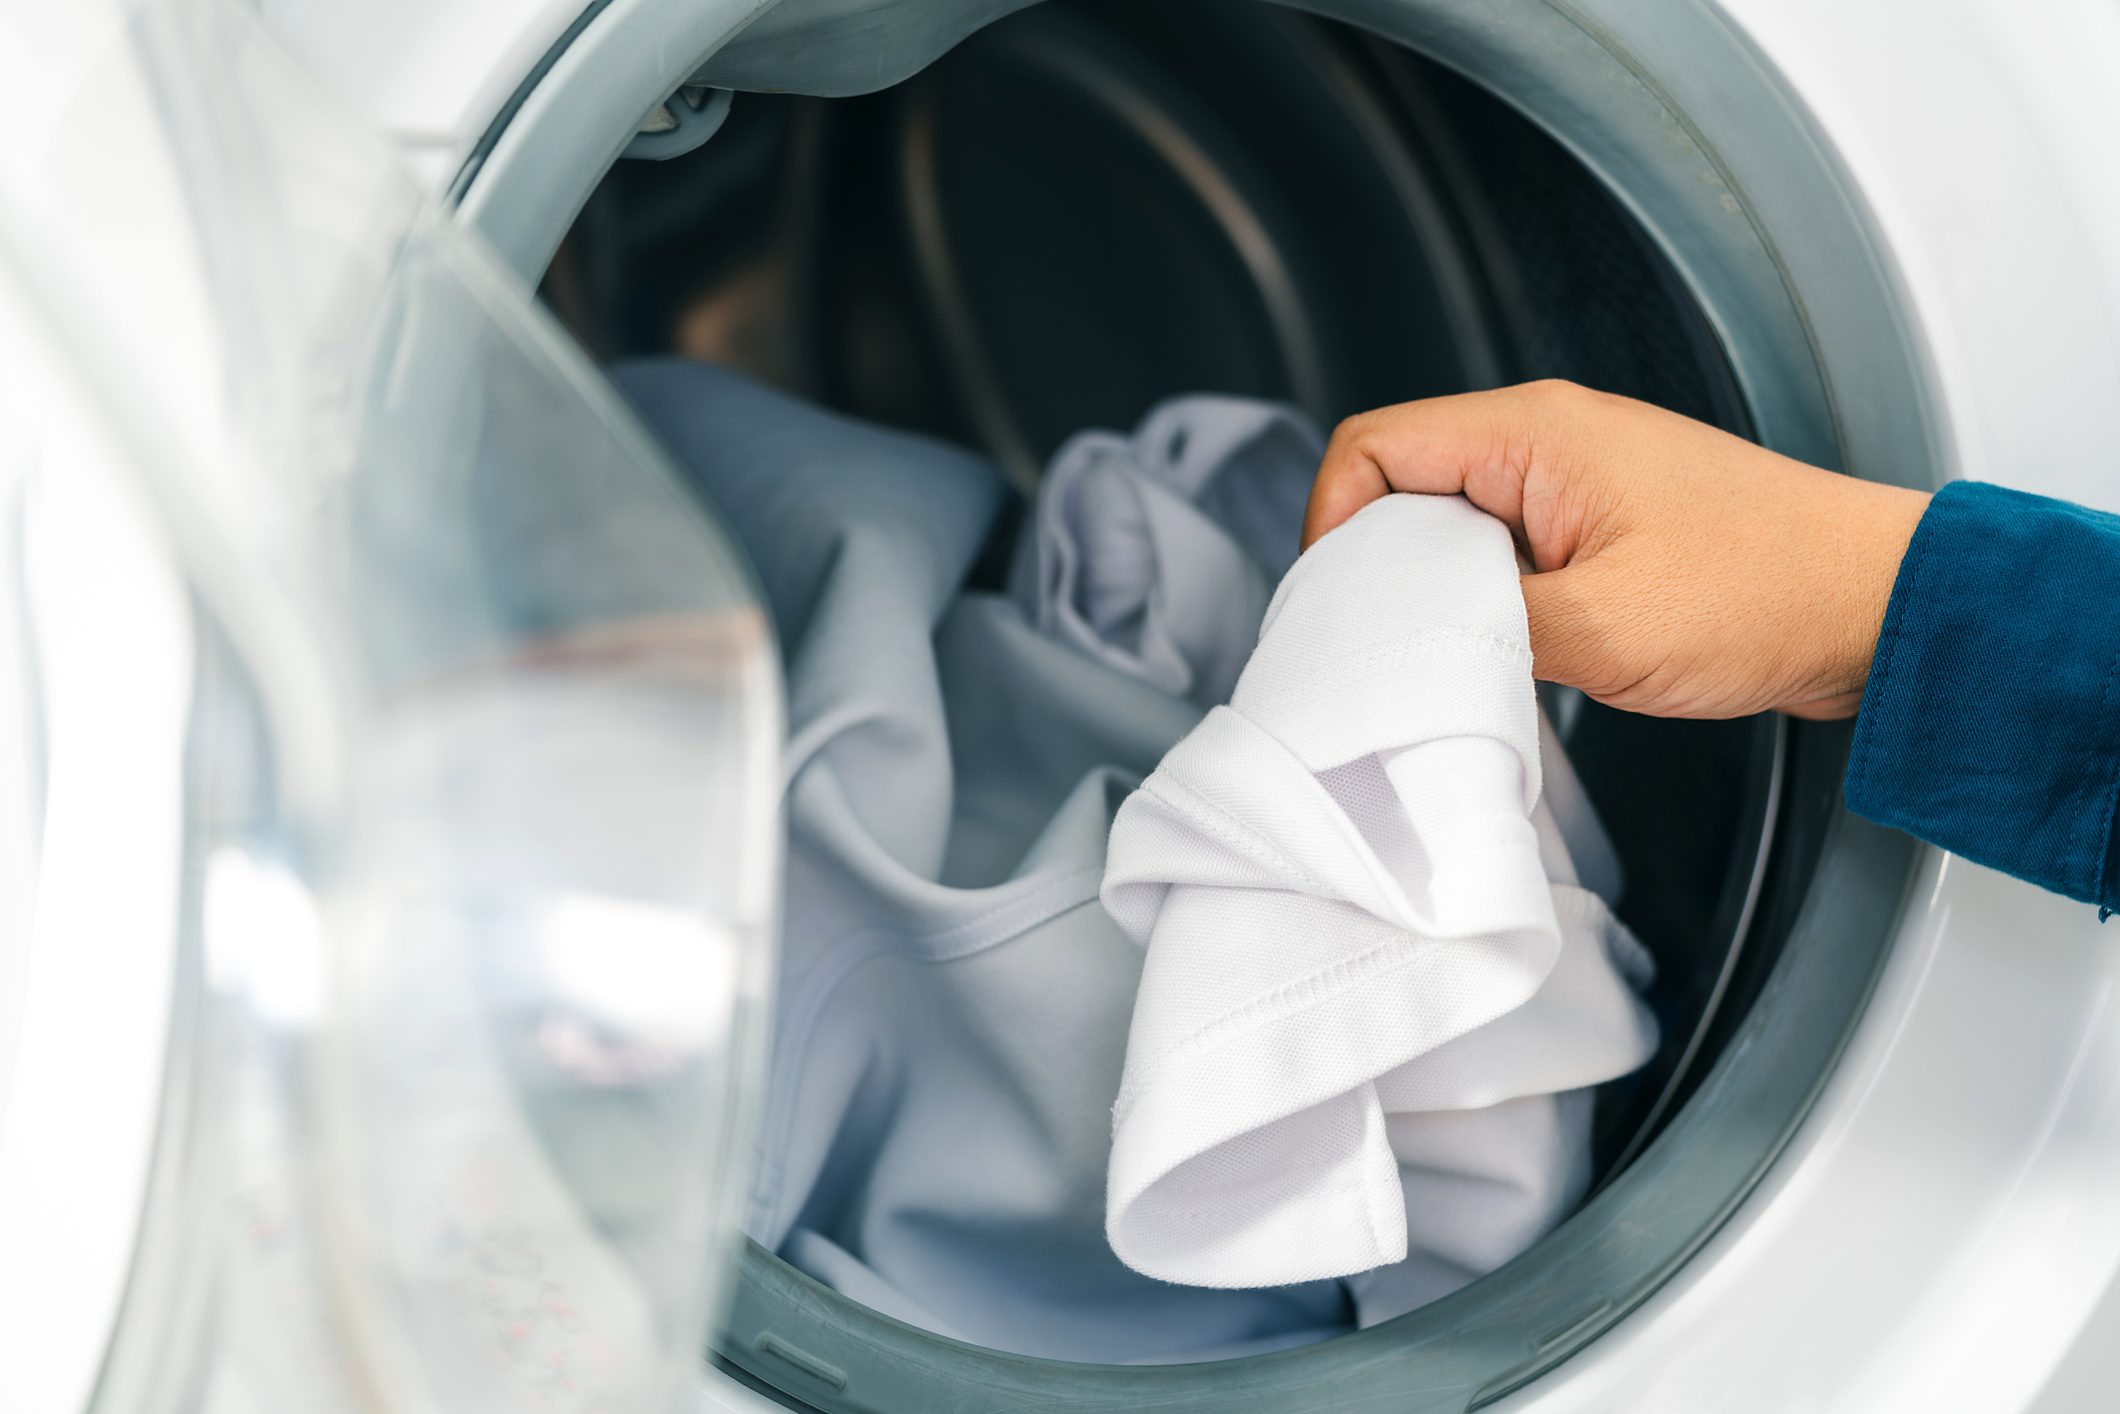 How to Shrink Clothes in the Washer And Dryer? 